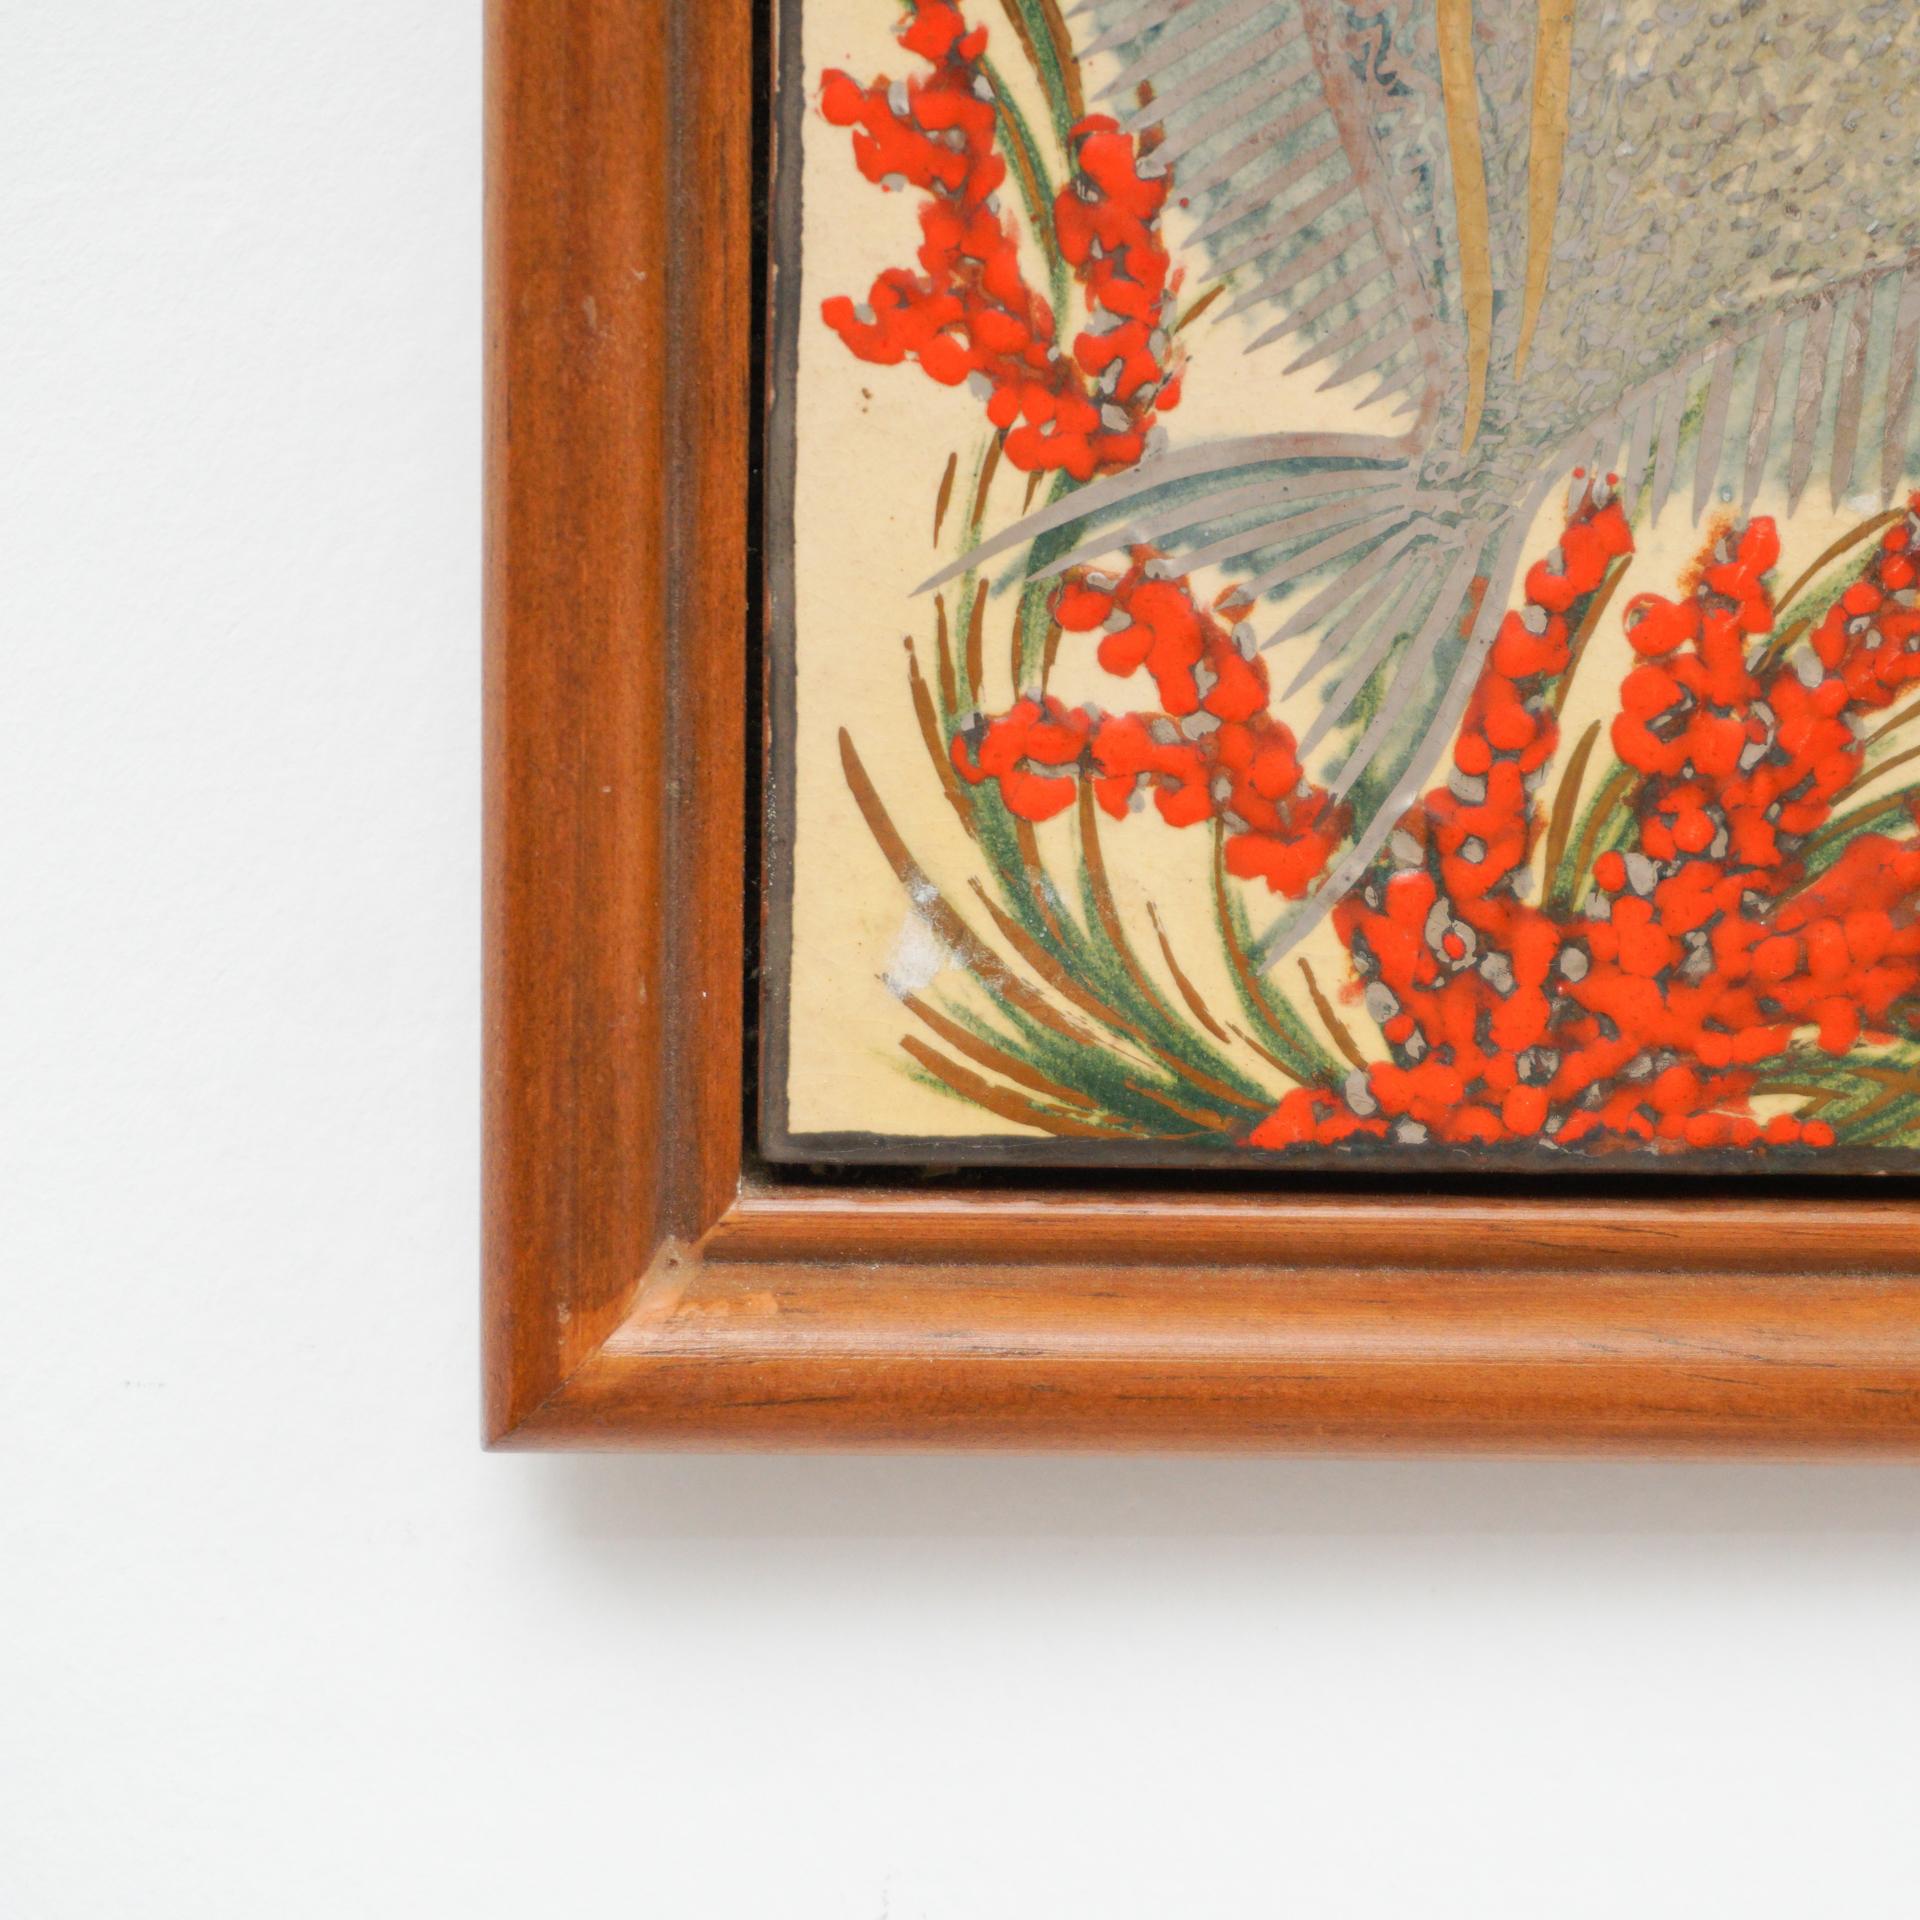 Ceramic hand painted artwork of a fish by Catalan artist Diaz Costa, circa 1960.
Framed.

In original condition, with minor wear consistent of age and use, preserving a beautiul patina.